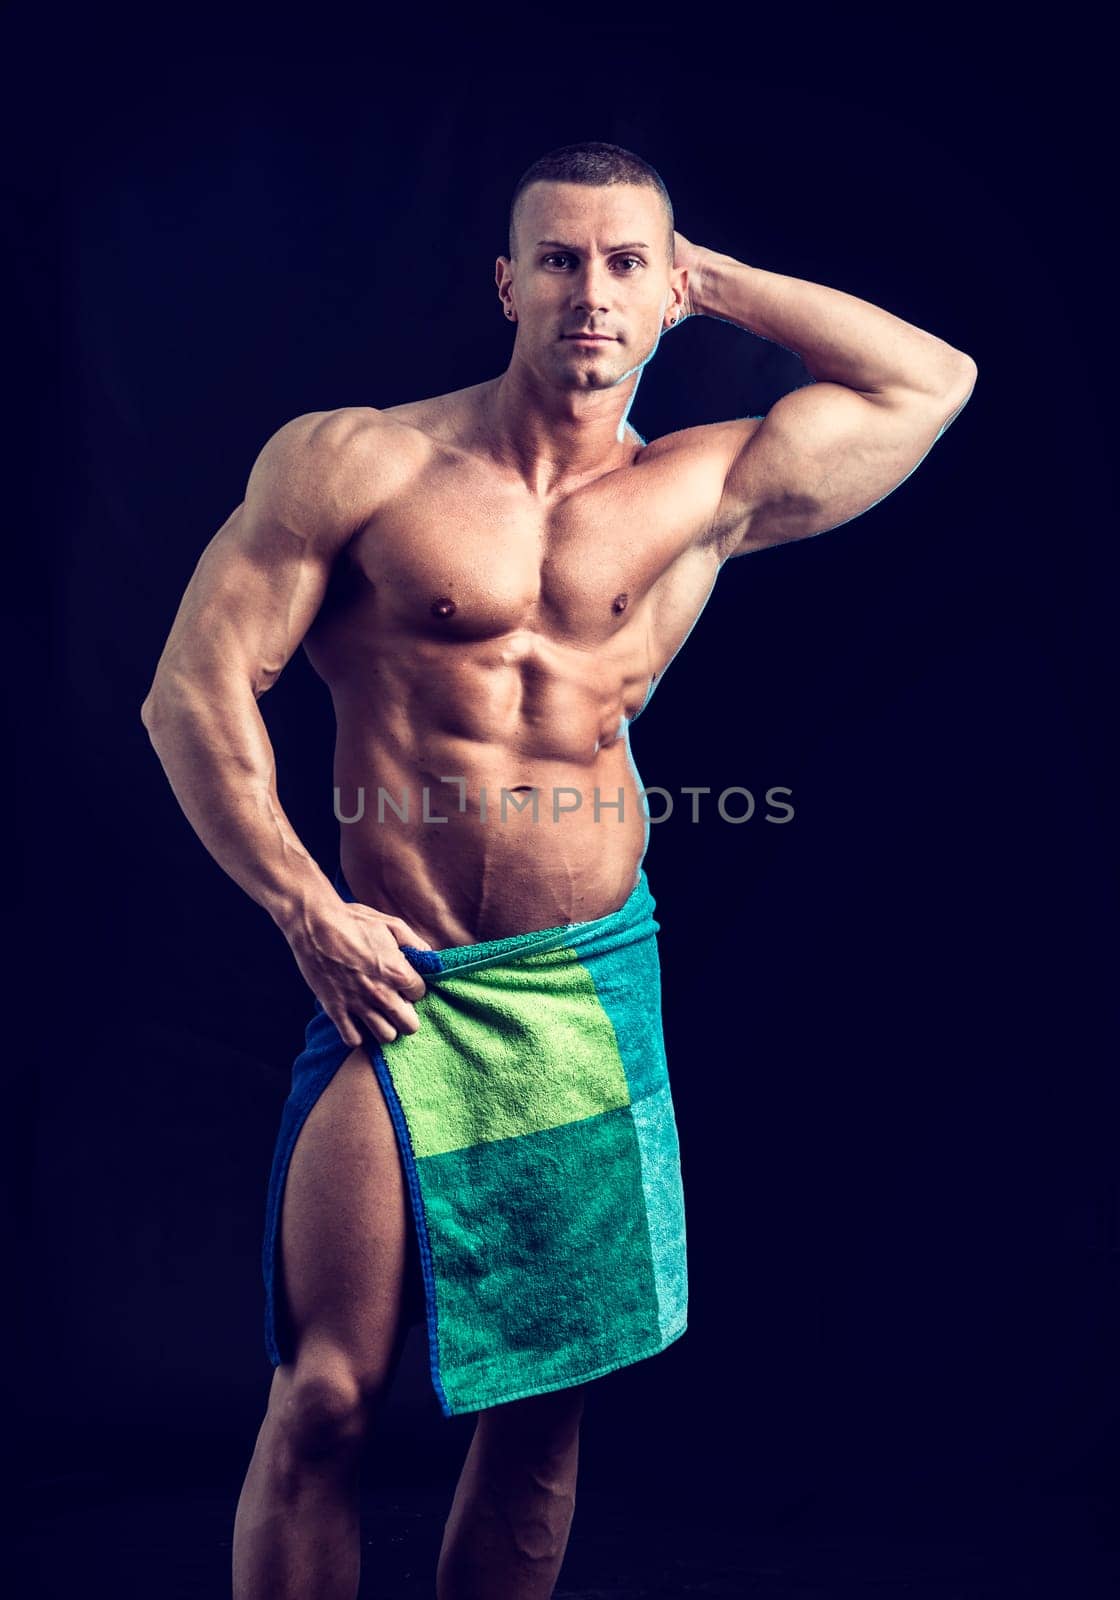 Photo of a shirtless man with a towel around his waist by artofphoto